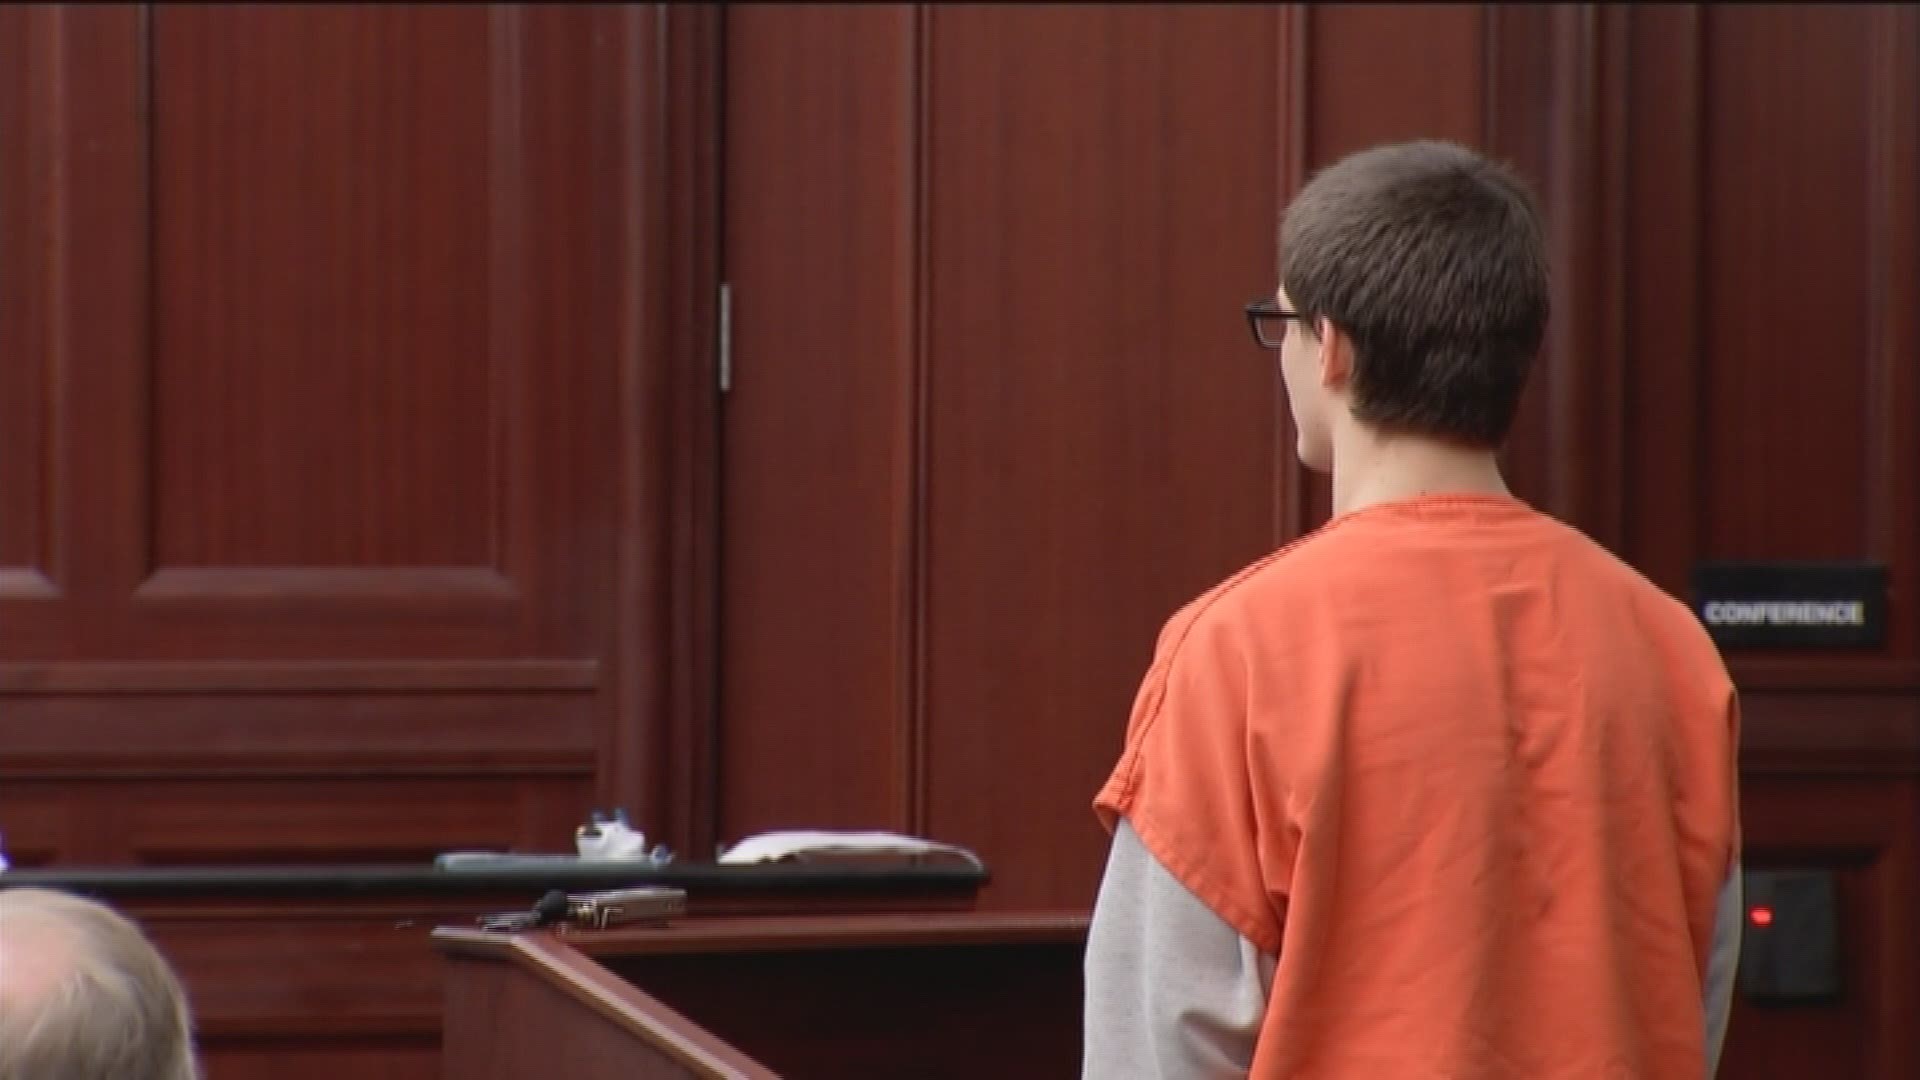 On Wednesday, Logan Mott addressed the judge during his sentencing hearing. He spoke about his grandmother who he pled guilty to killing in September.